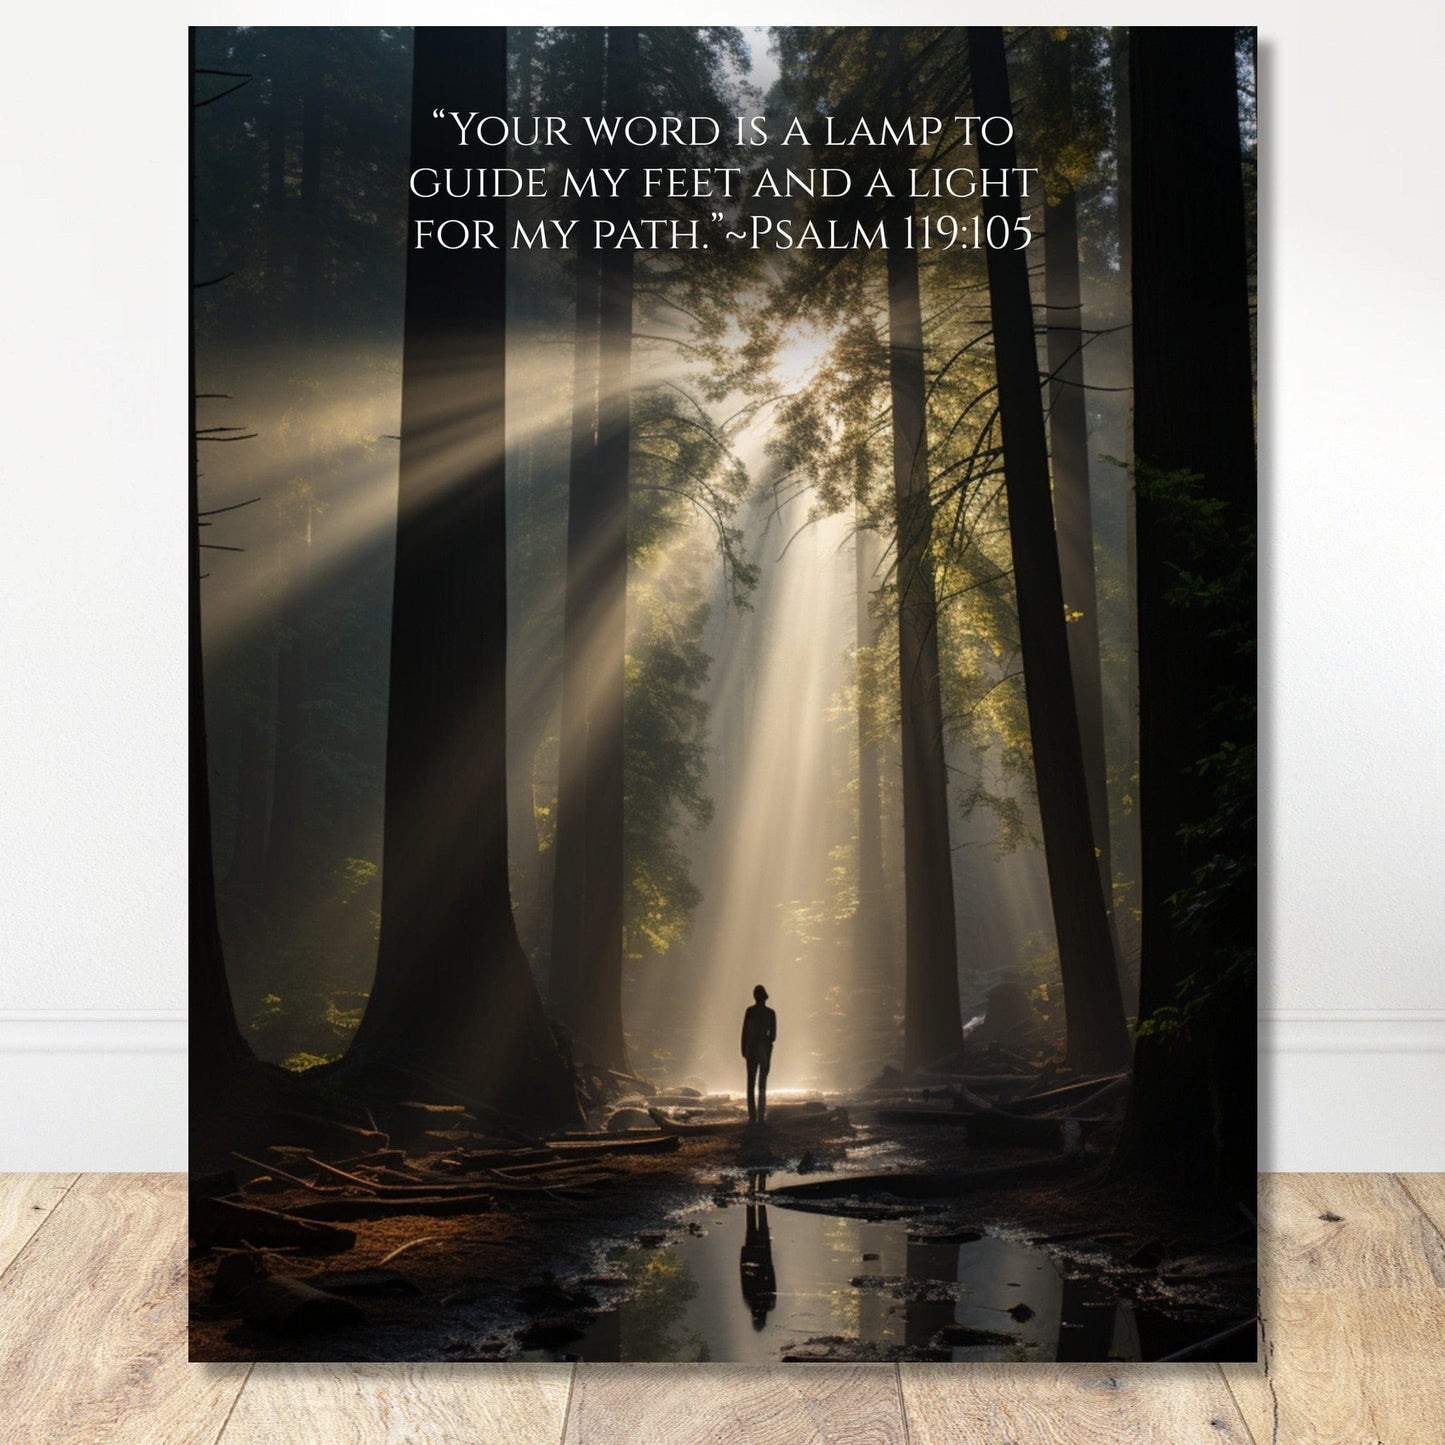 Coffee With My Father Print Material 40x50 cm / 16x20″ / Premium Matte Paper Poster / - Framed Template